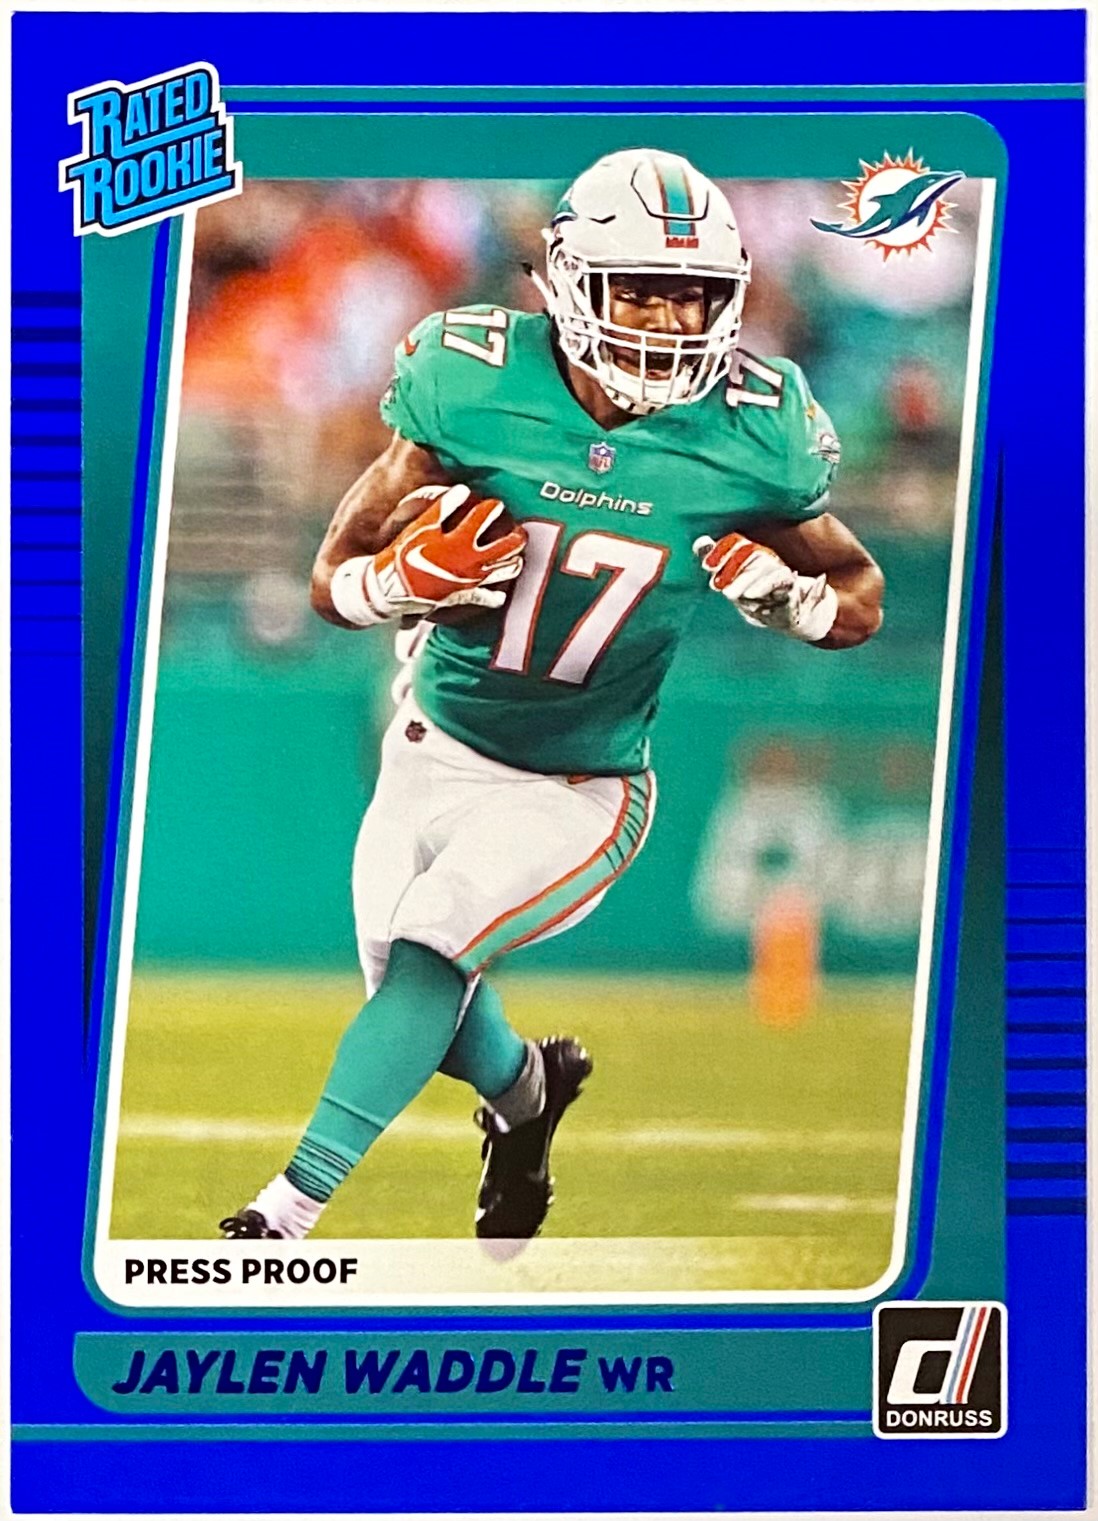 Jaylen Waddle 2021 Panini Donruss Football Miami Dolphins Press Proof Blue Rated Rookie Card 